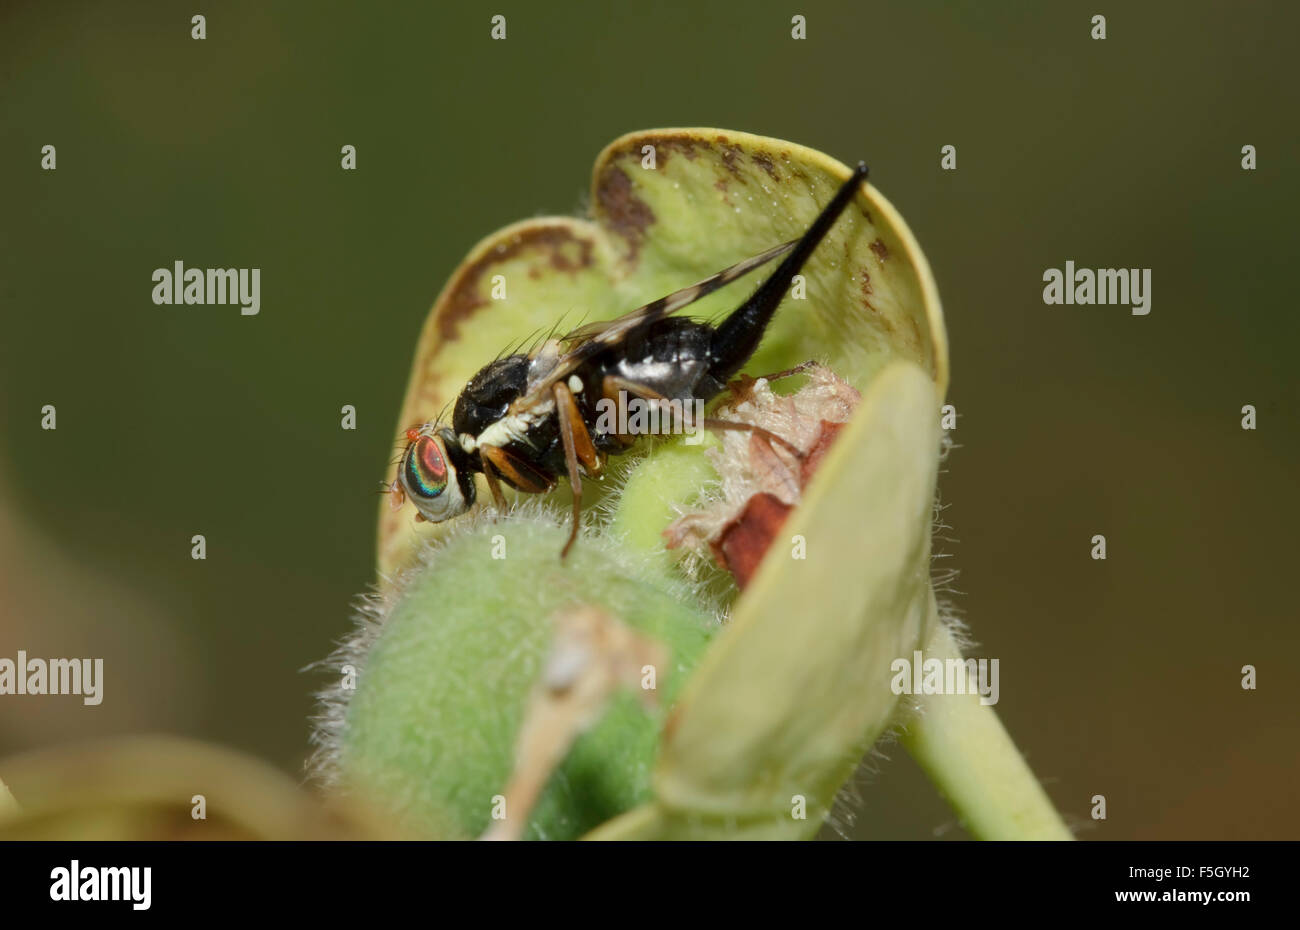 Macro photo of a fruit fly insect resting on a plant's stem. Stock Photo